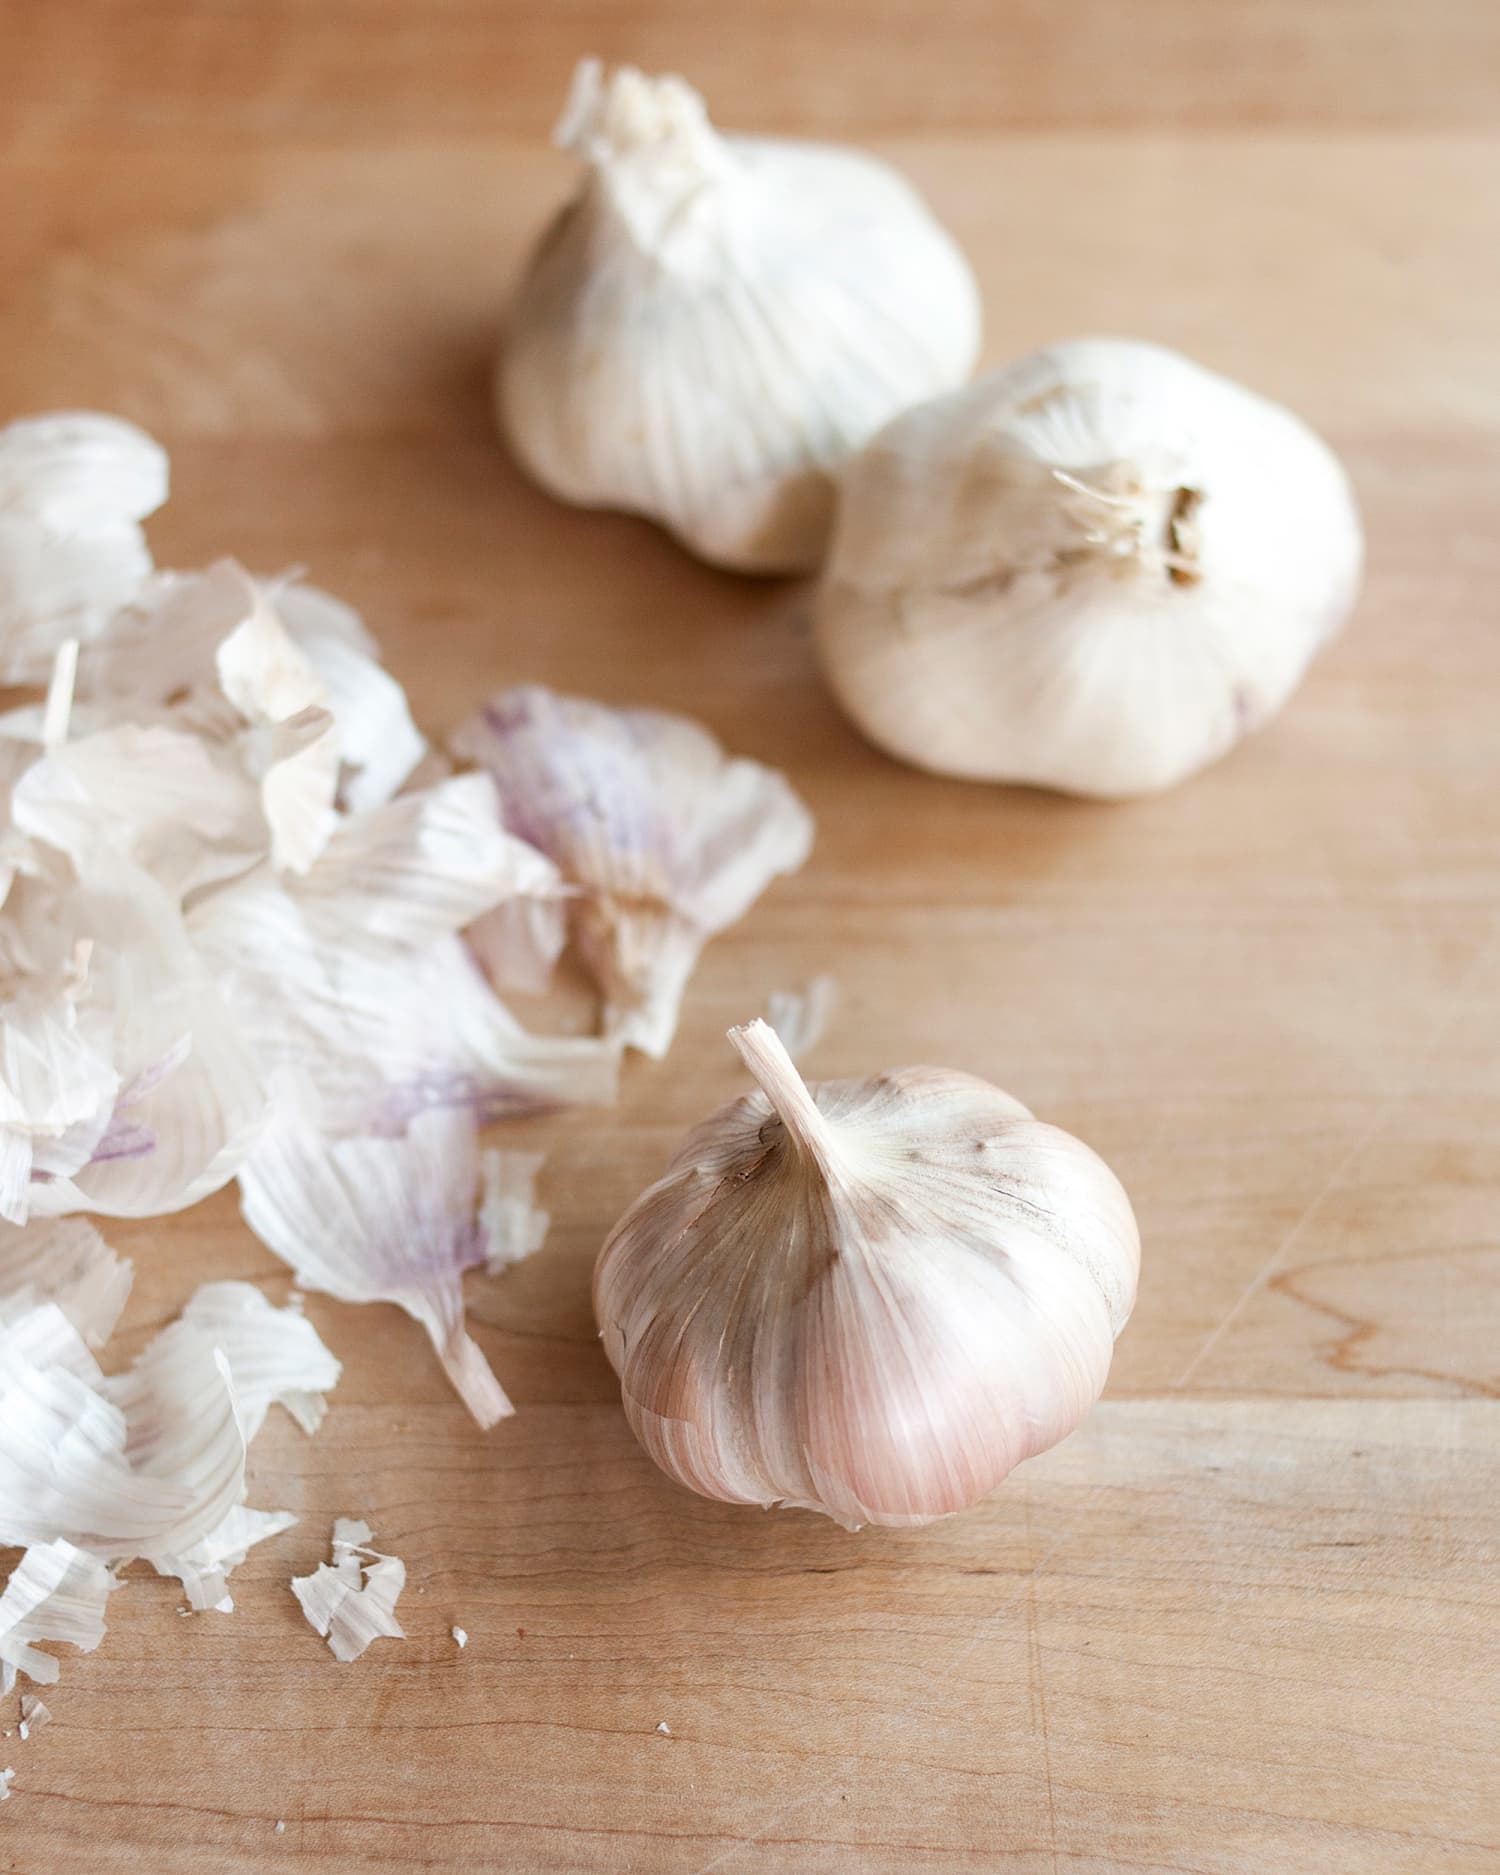 10 Chef-Approved Garlic Tips Every Cook Should Know